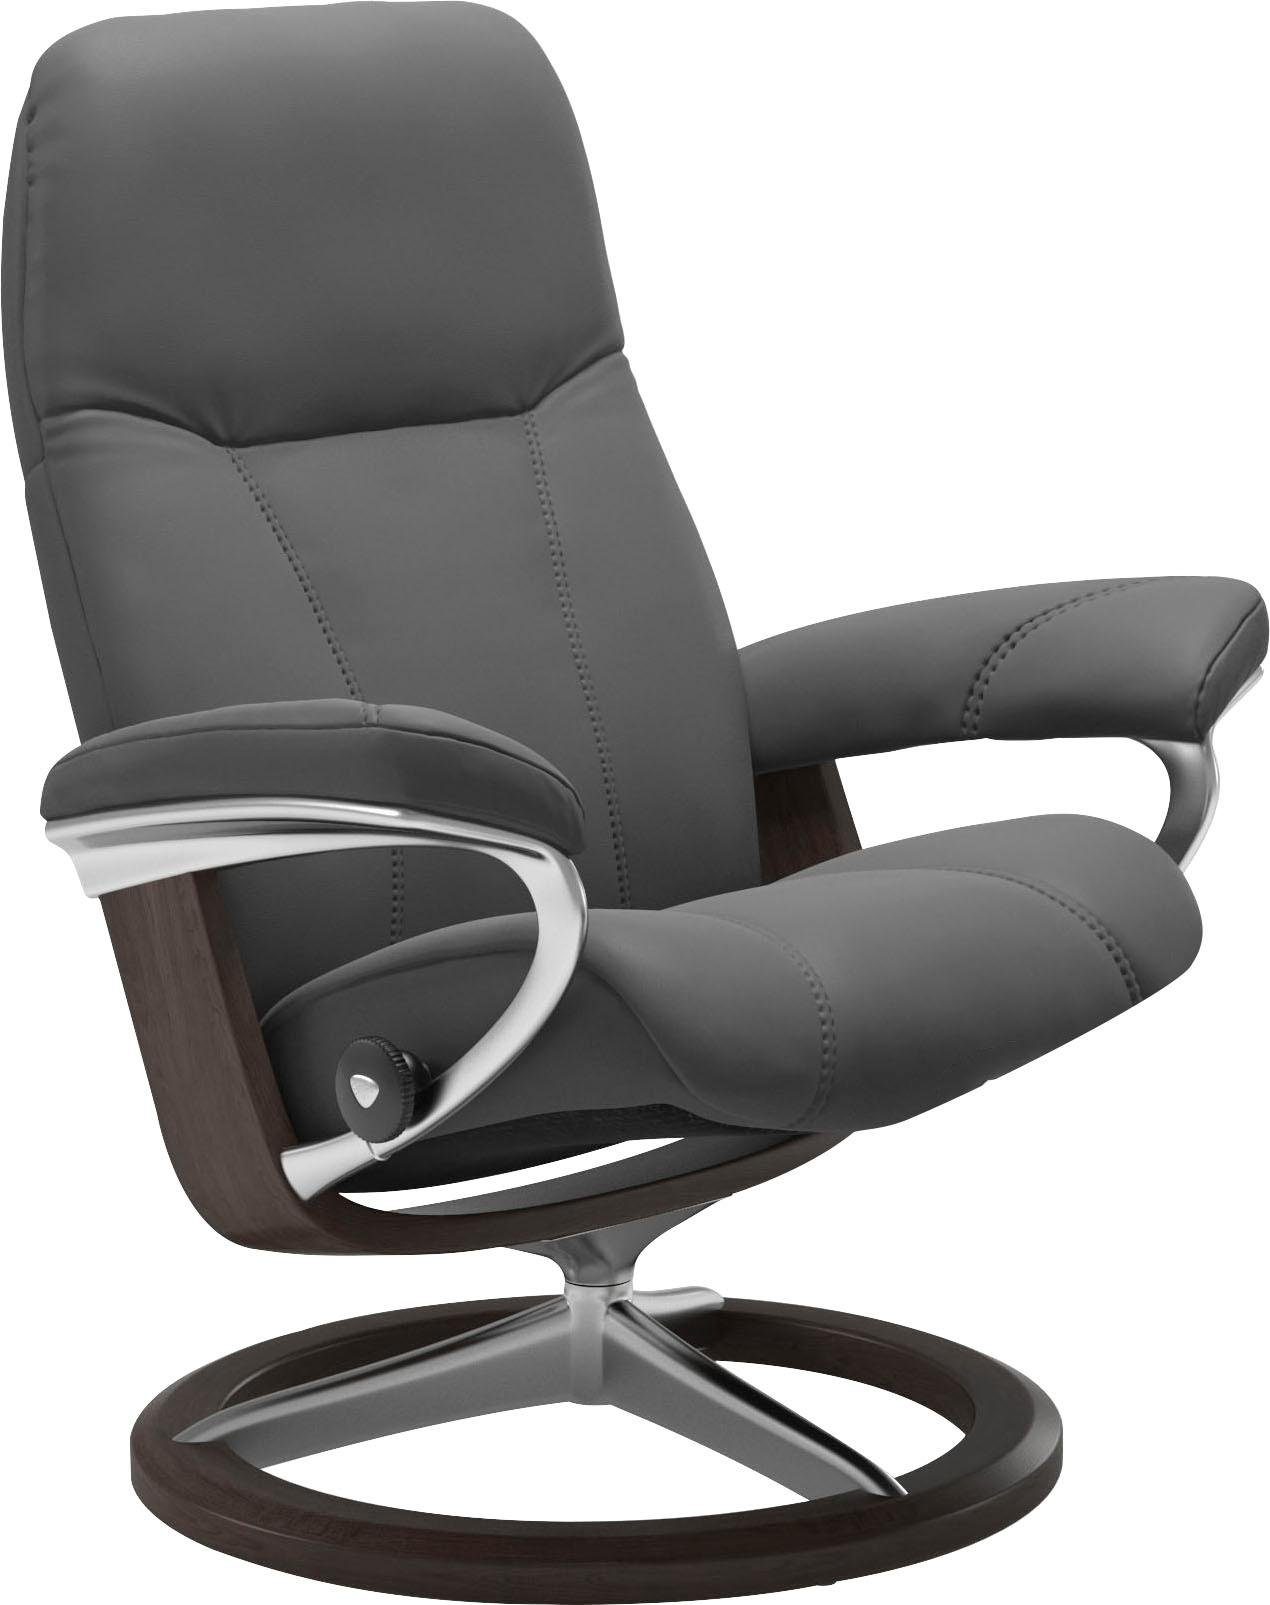 Größe Wenge Gestell S, mit Consul, Signature Relaxsessel Base, Stressless®